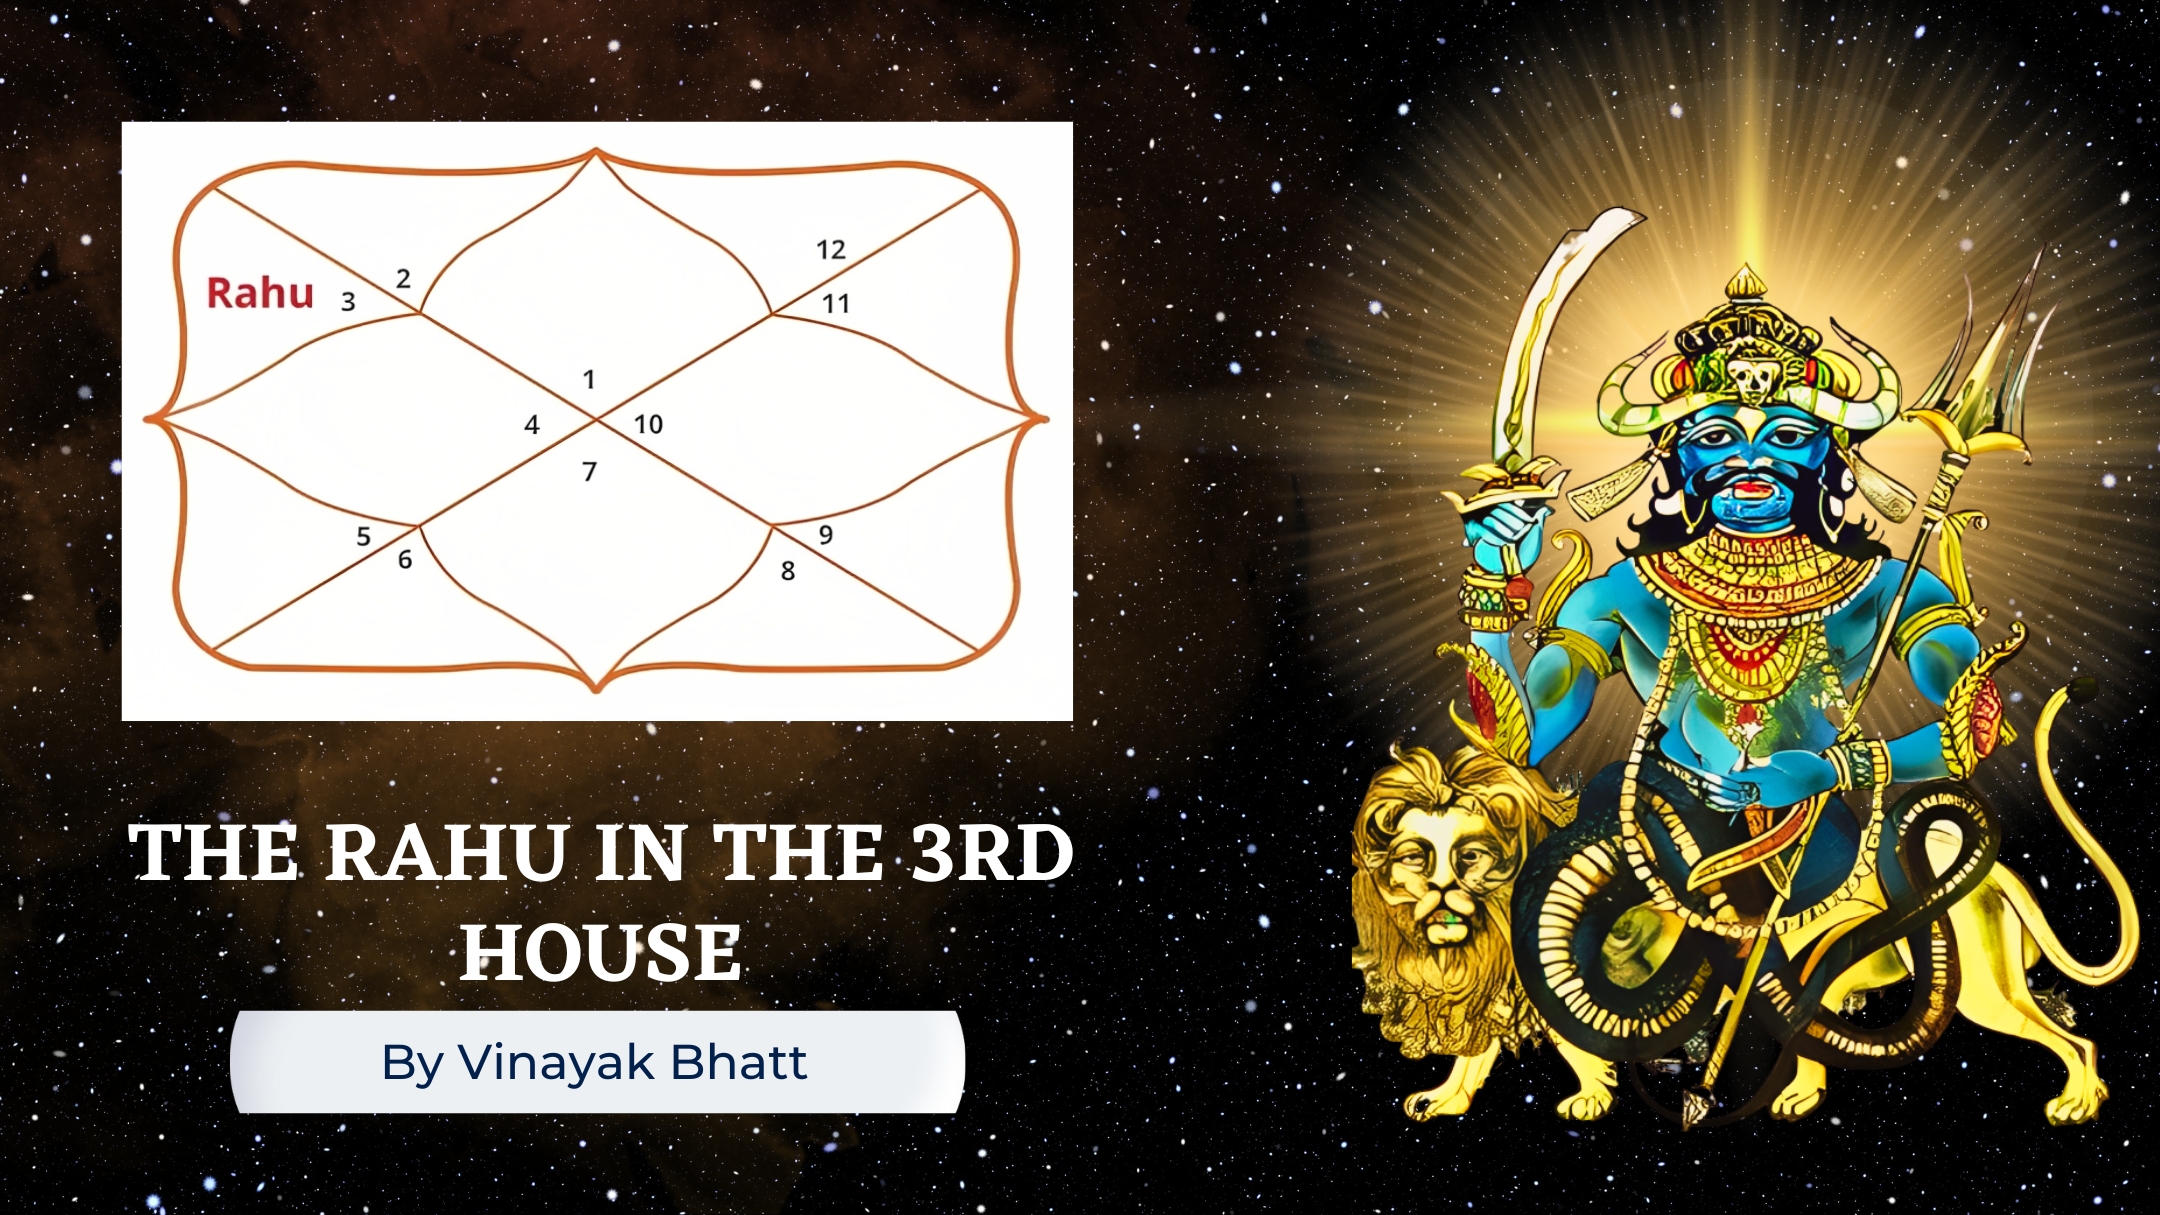 The Rahu in the 3rd House